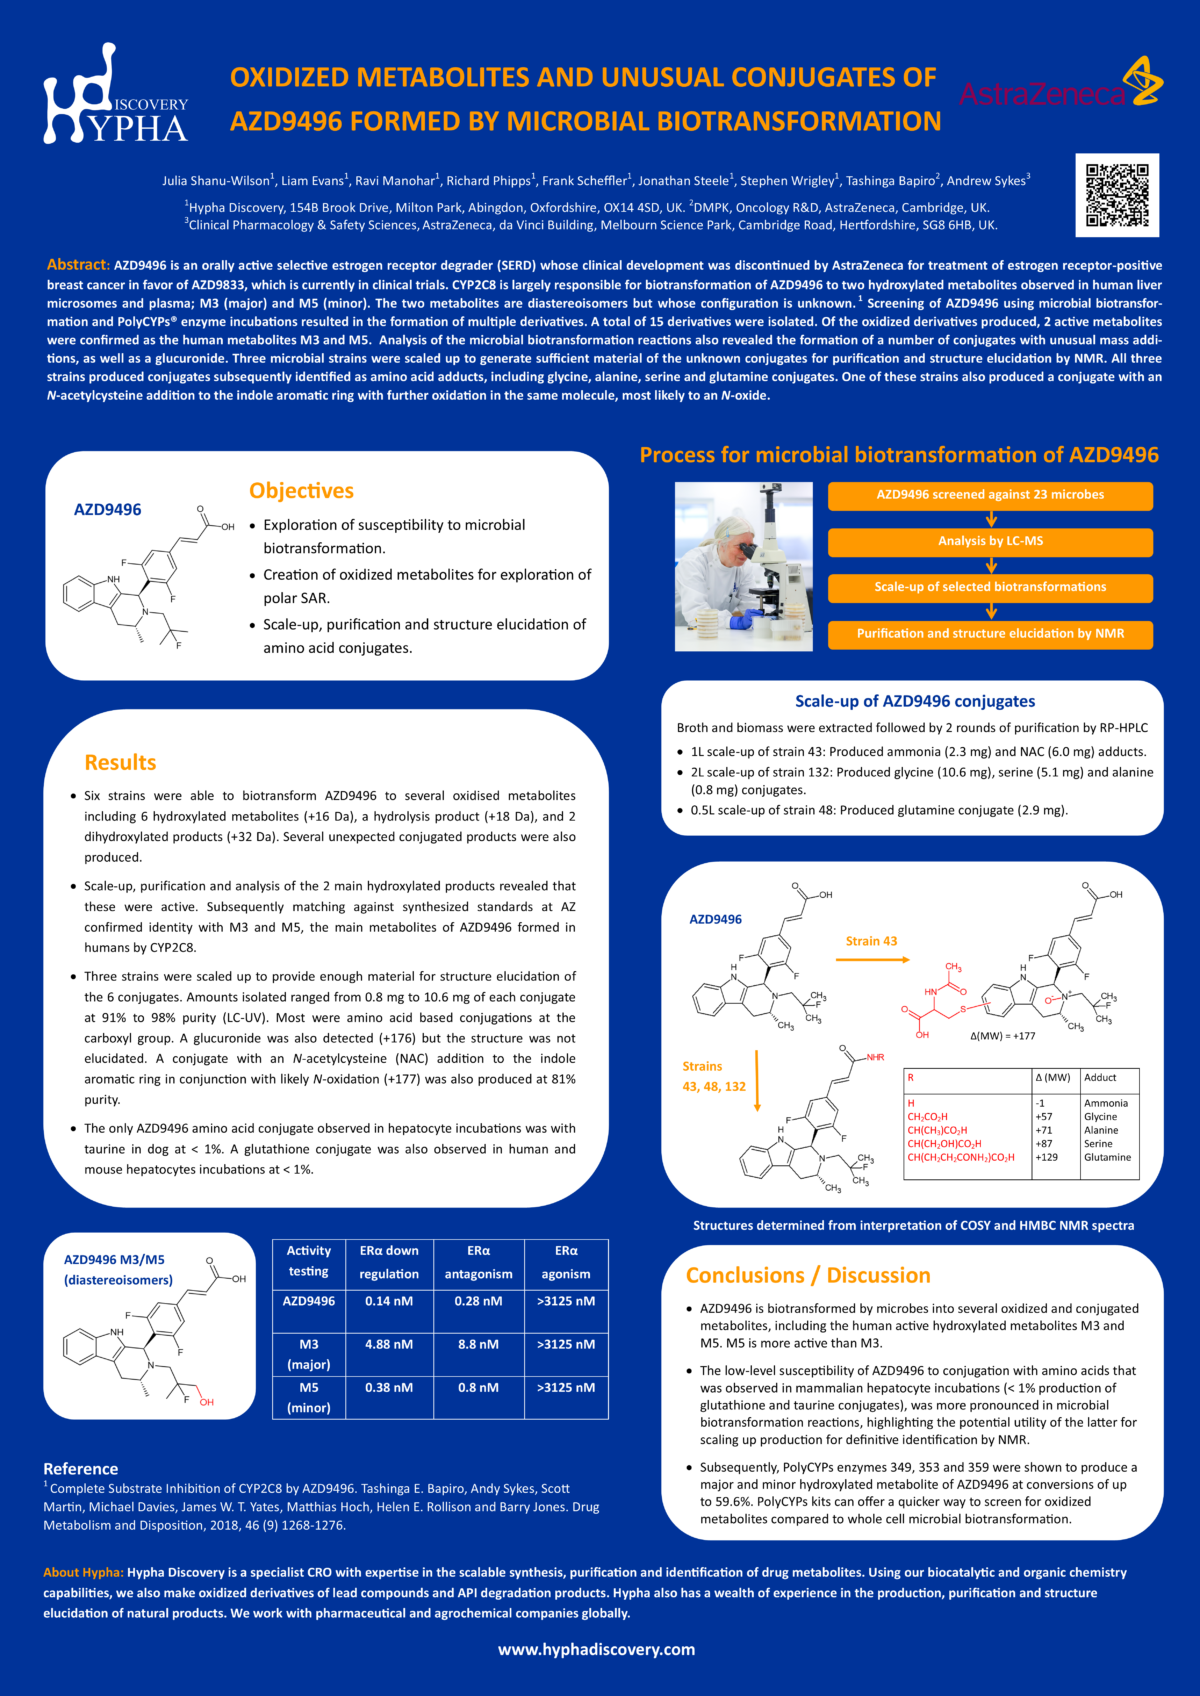 Poster presented on Oxidized metabolites and unusual conjugates of AZD9496 at the September 2022 ISSX meeting in Seattle